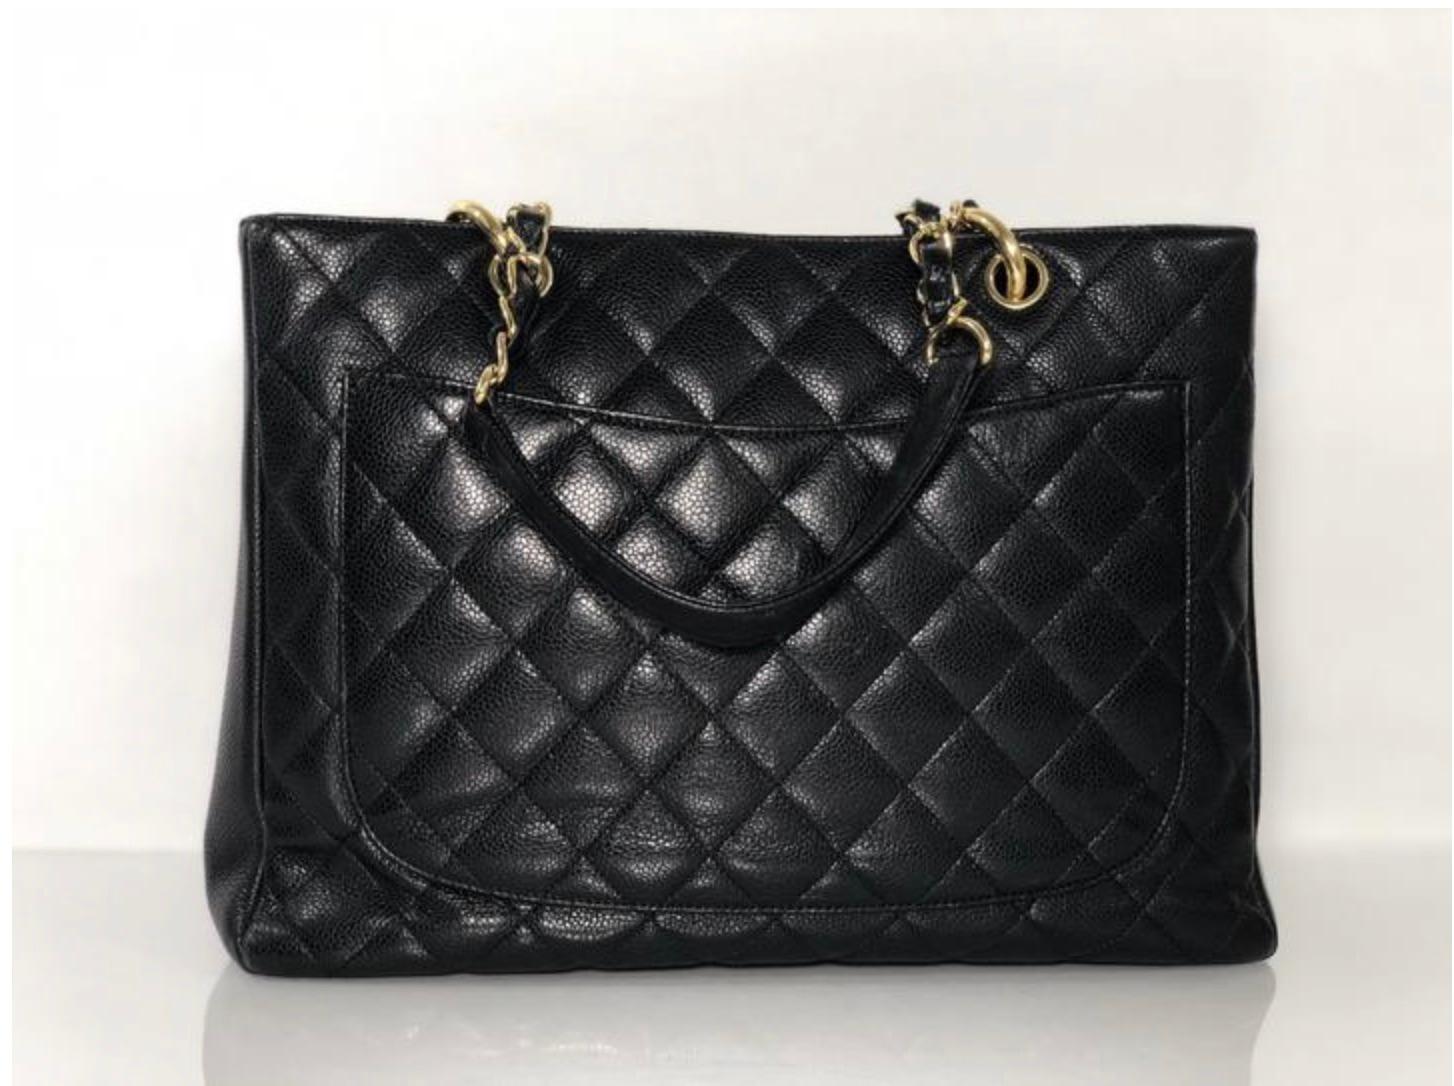 Chanel Caviar Leather Grand Shopping Tote w Gold Hardware in Black Shoulder Bag In Good Condition For Sale In Saint Charles, IL